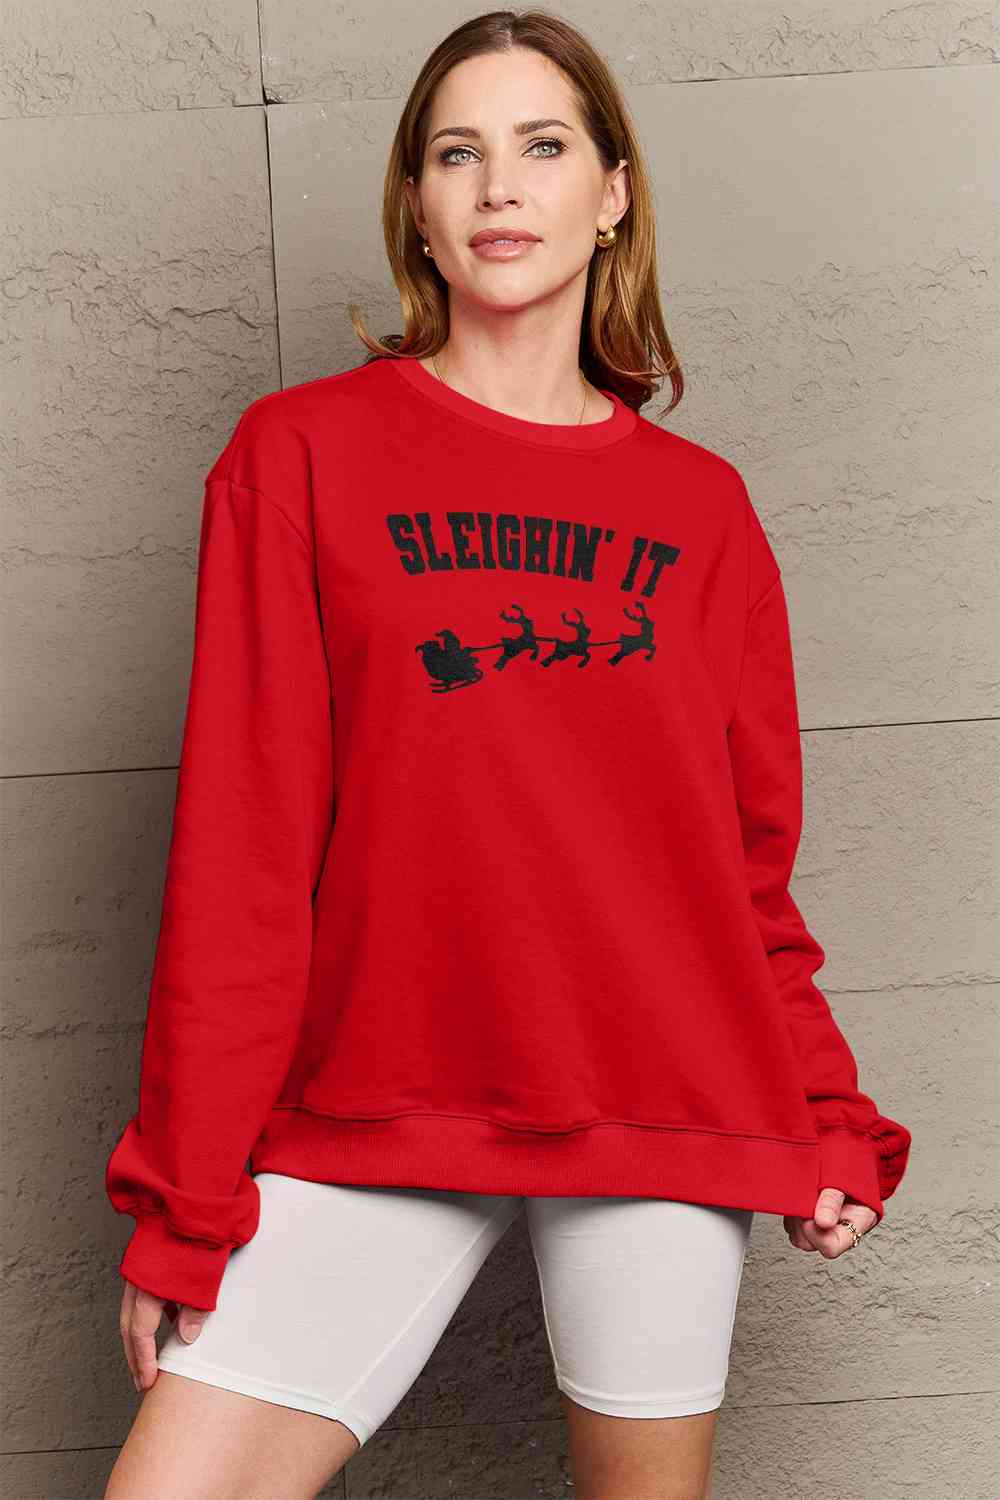 Rosy Brown Simply Love Full Size SLEIGHIN' IT Graphic Sweatshirt Sentient Beauty Fashions Apparel & Accessories